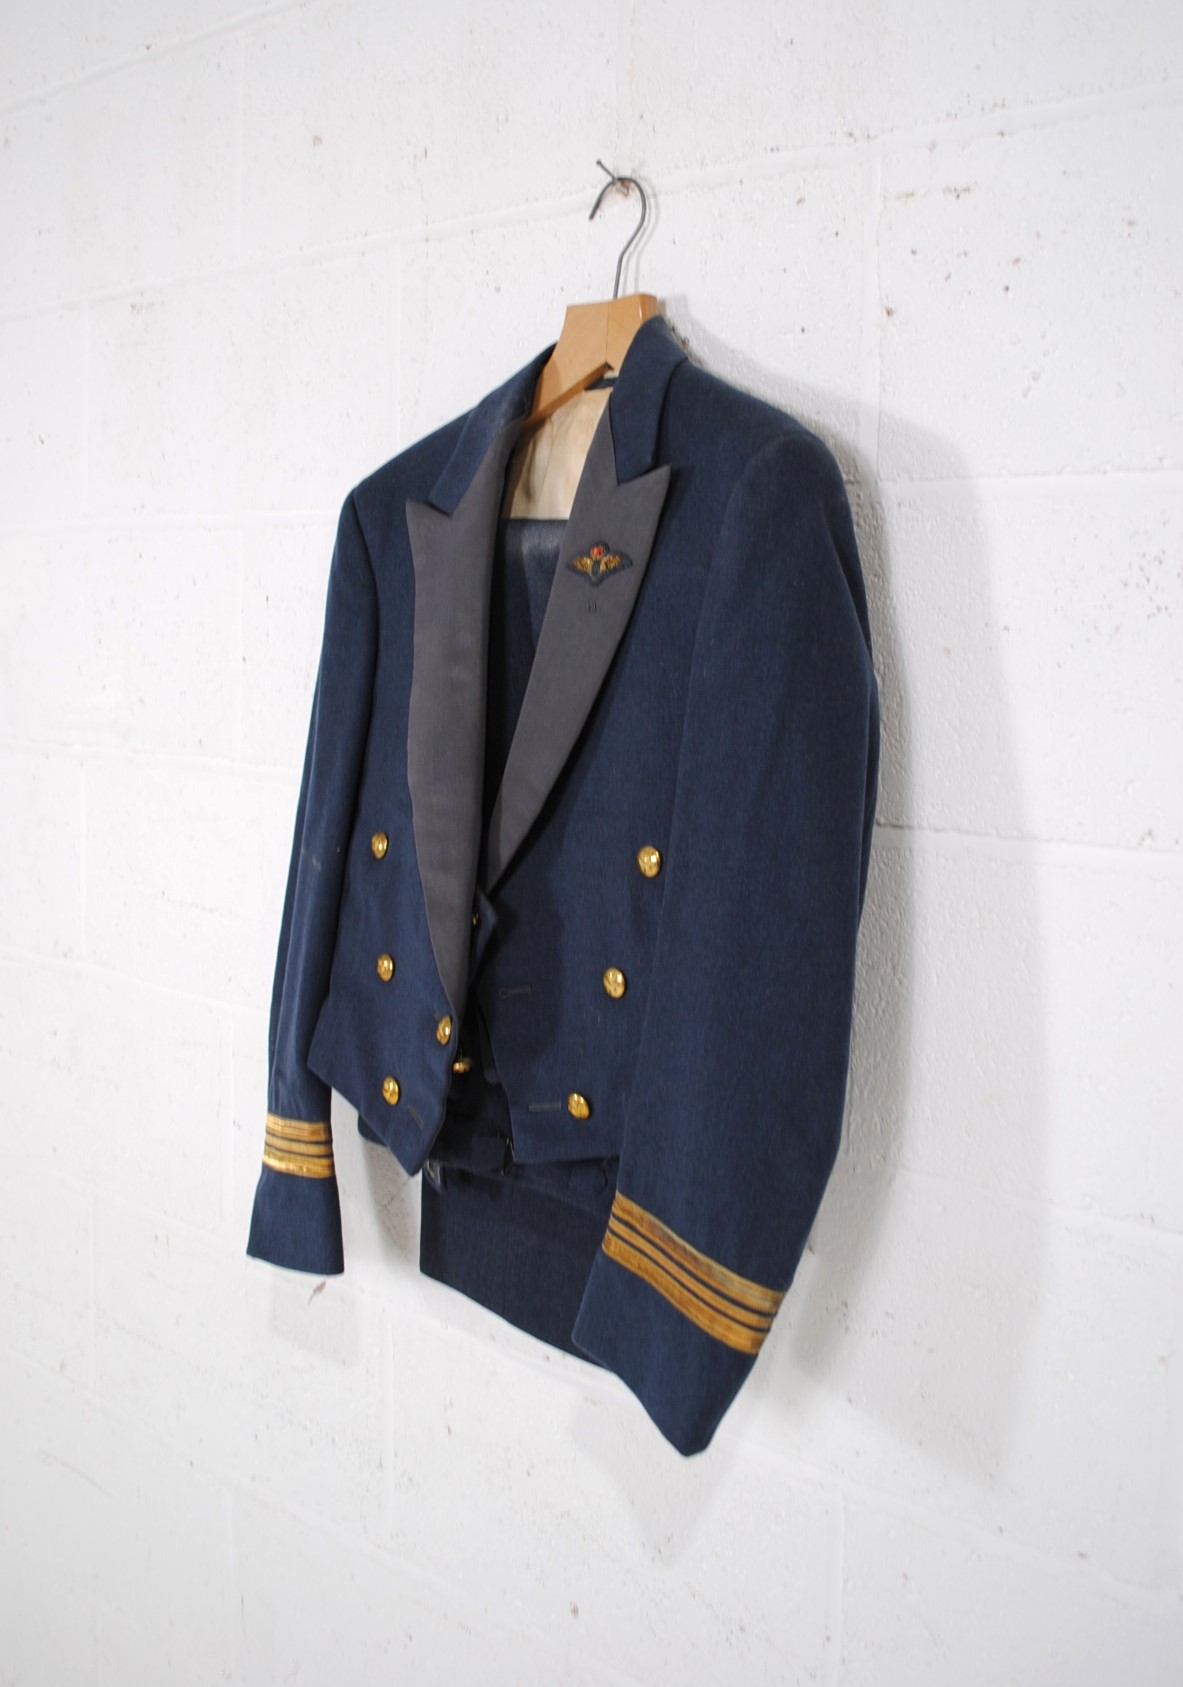 An 'Alkit' RAF Mess uniform, comprising a jacket, waistcoat and trousers - Image 2 of 6